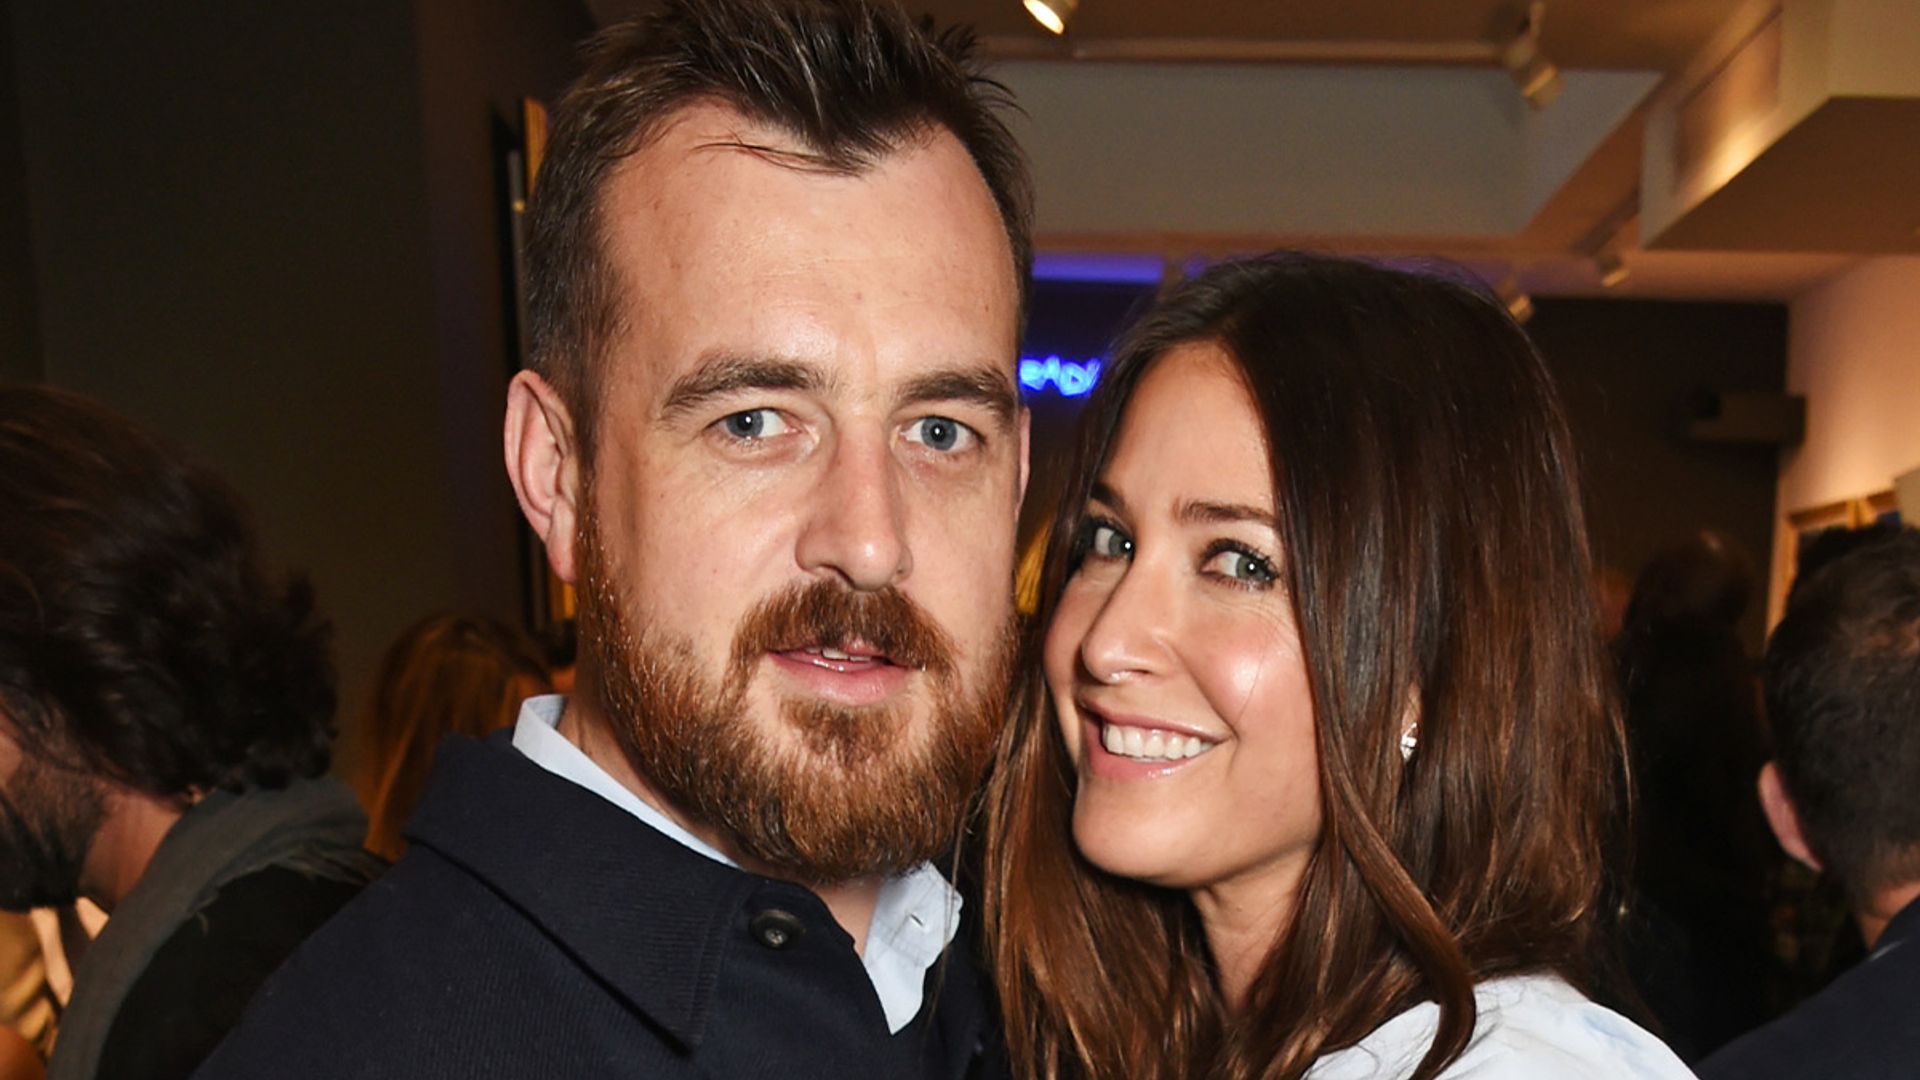 Lisa Snowdon and her fiancé George have designed dream home from scratch - exclusive